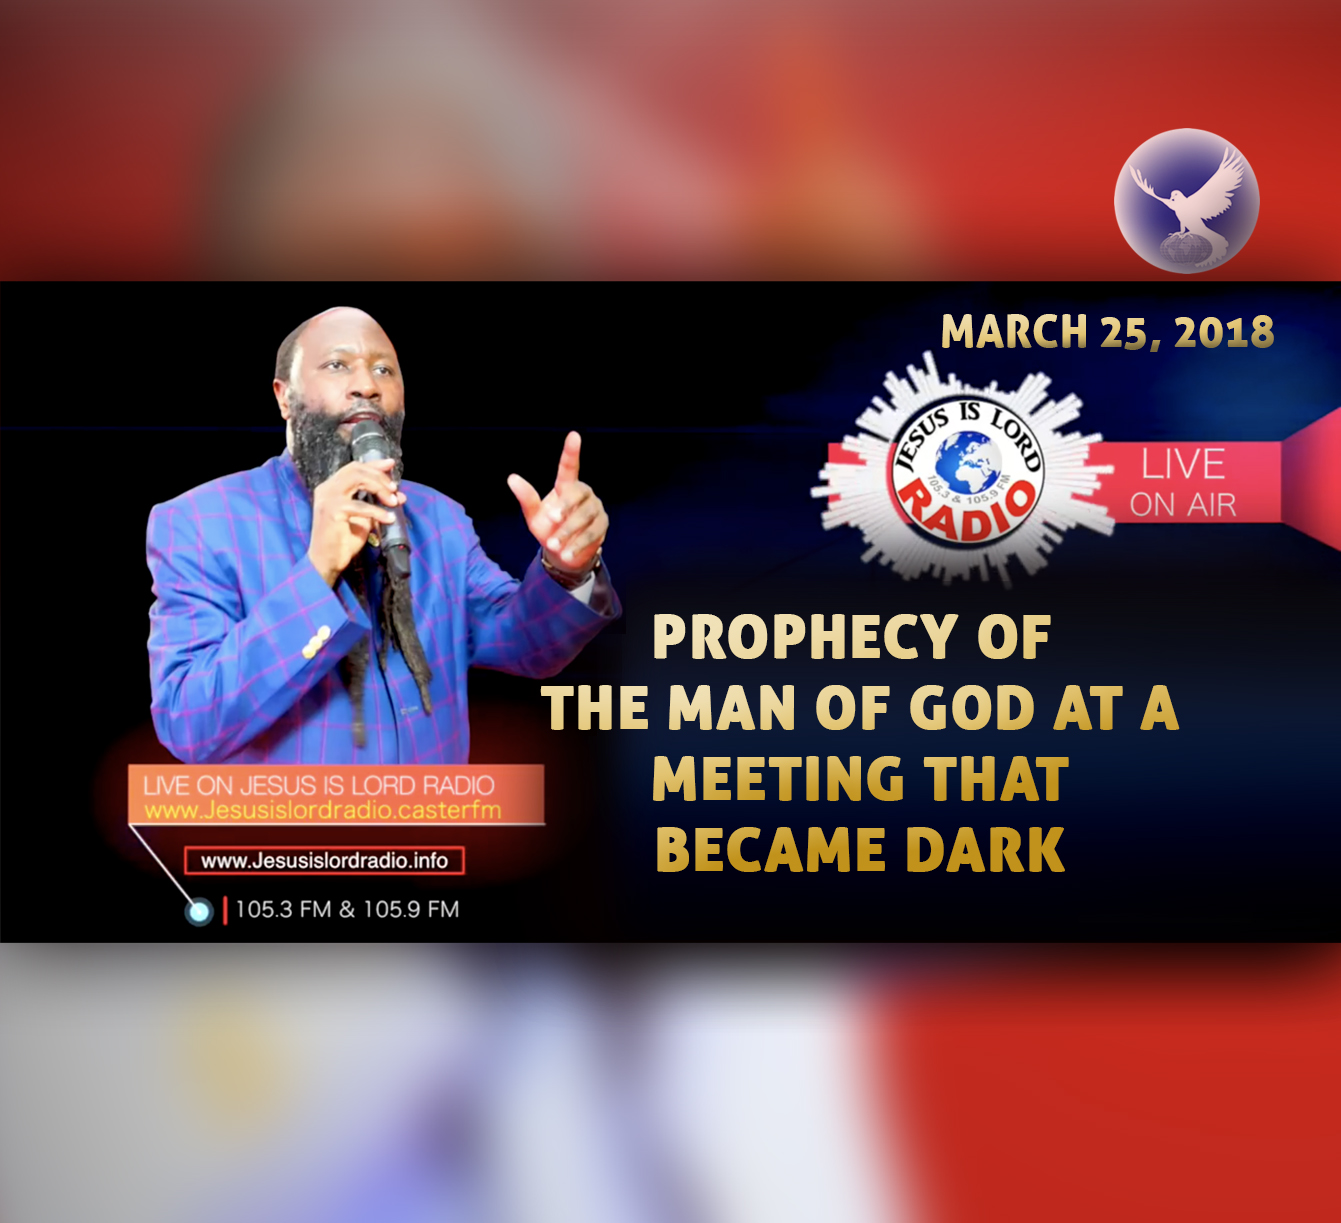 EPISODE 152 - PART 3: THE VISION OF THE MAN OF GOD AT A MEETING THAT BECAME DARK (25MAR2018) - PROPHET DR. OWUOR